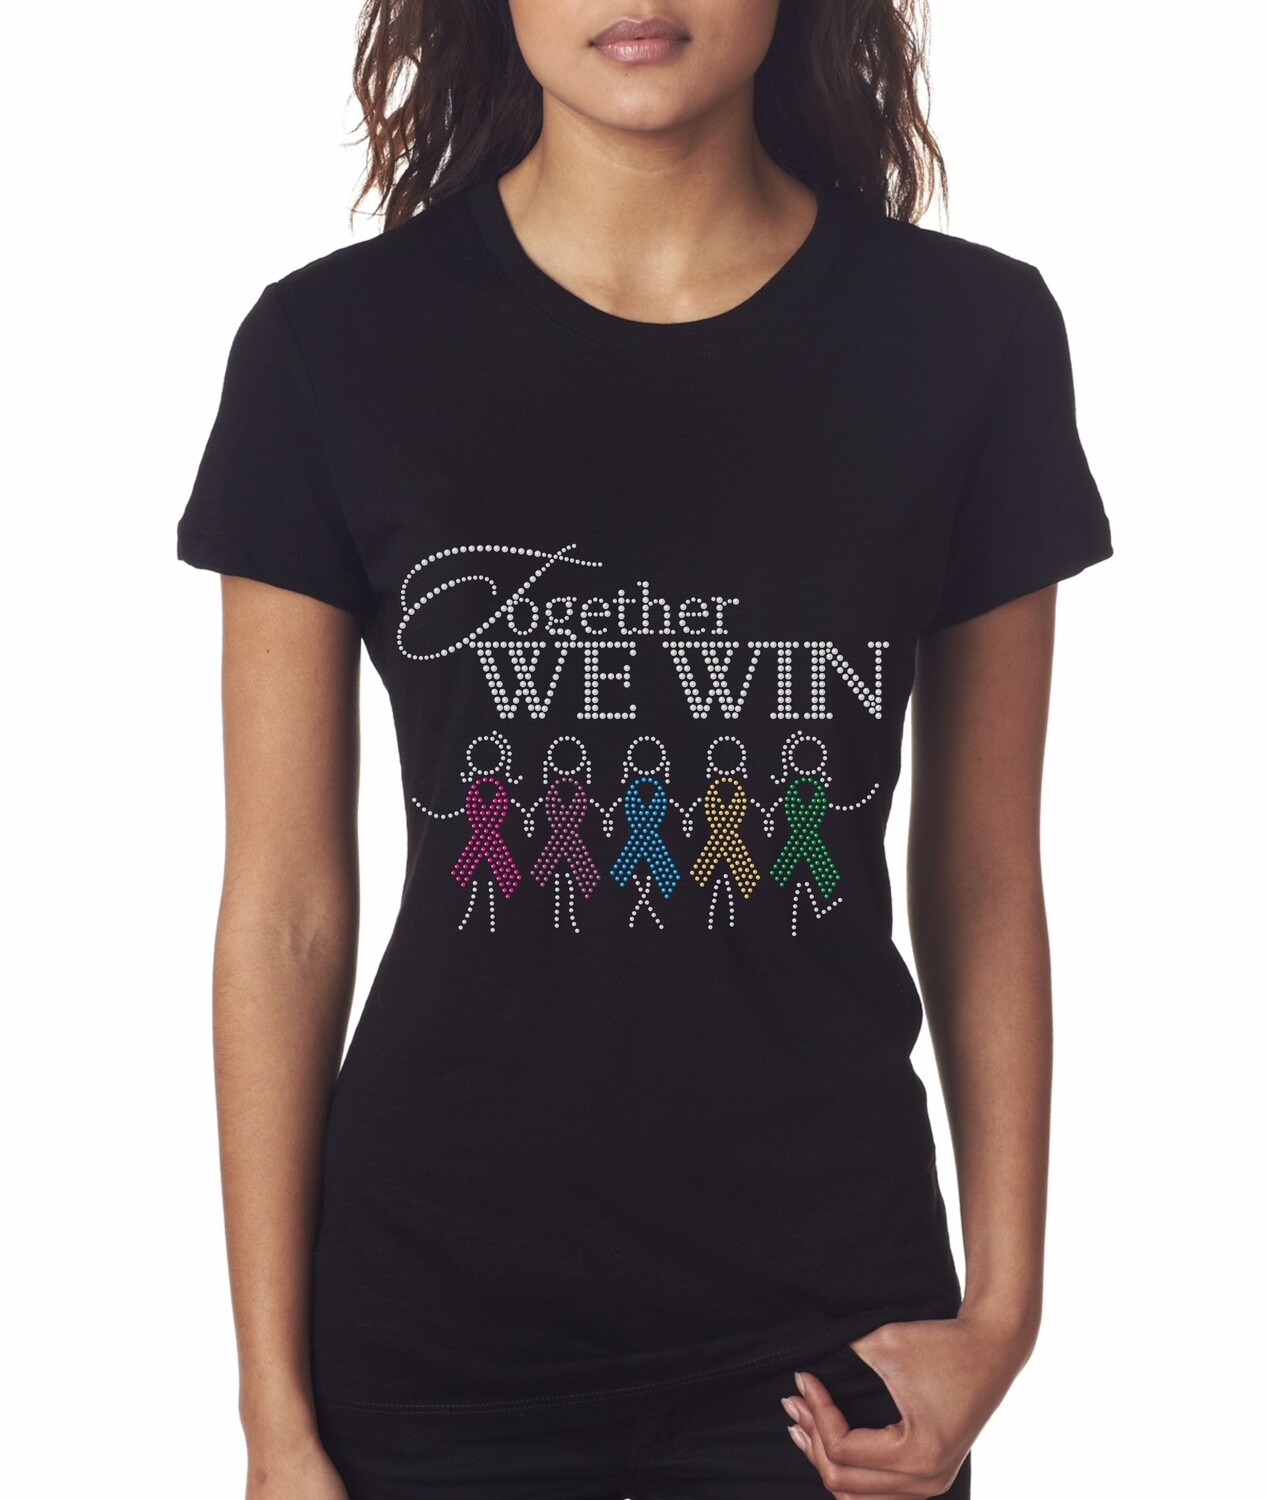 Together We Win Tee